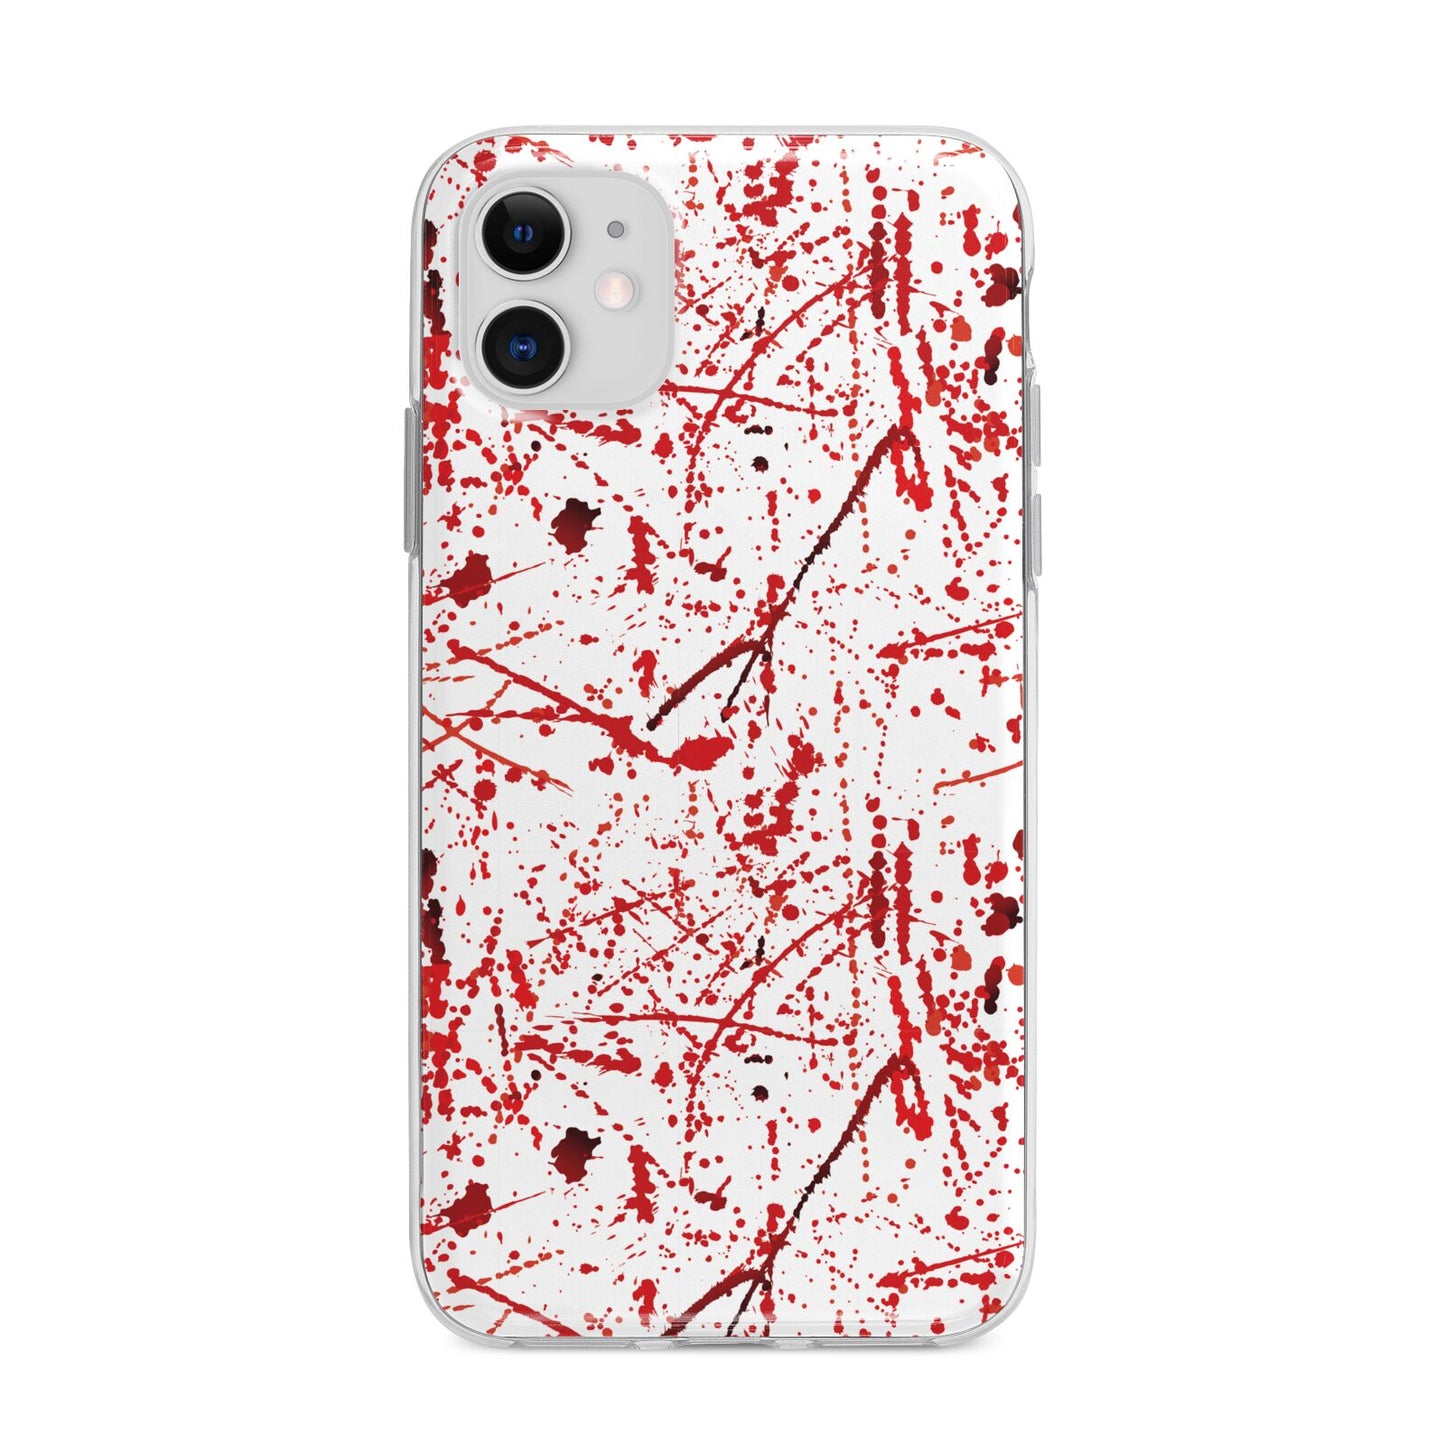 Blood Splatter Apple iPhone 11 in White with Bumper Case